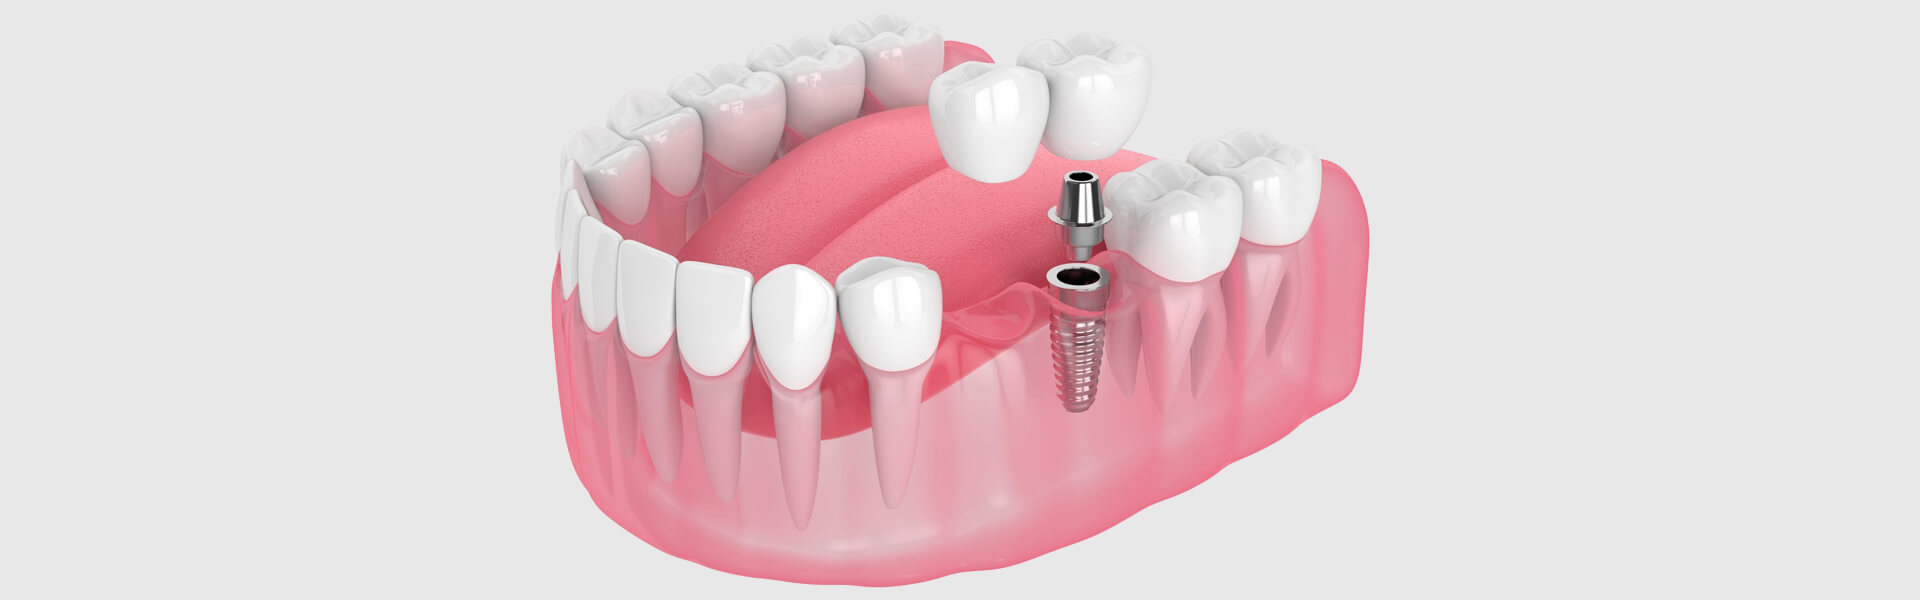 How Your Smile Can Be Restored with All-On-4®️ Dental Implants